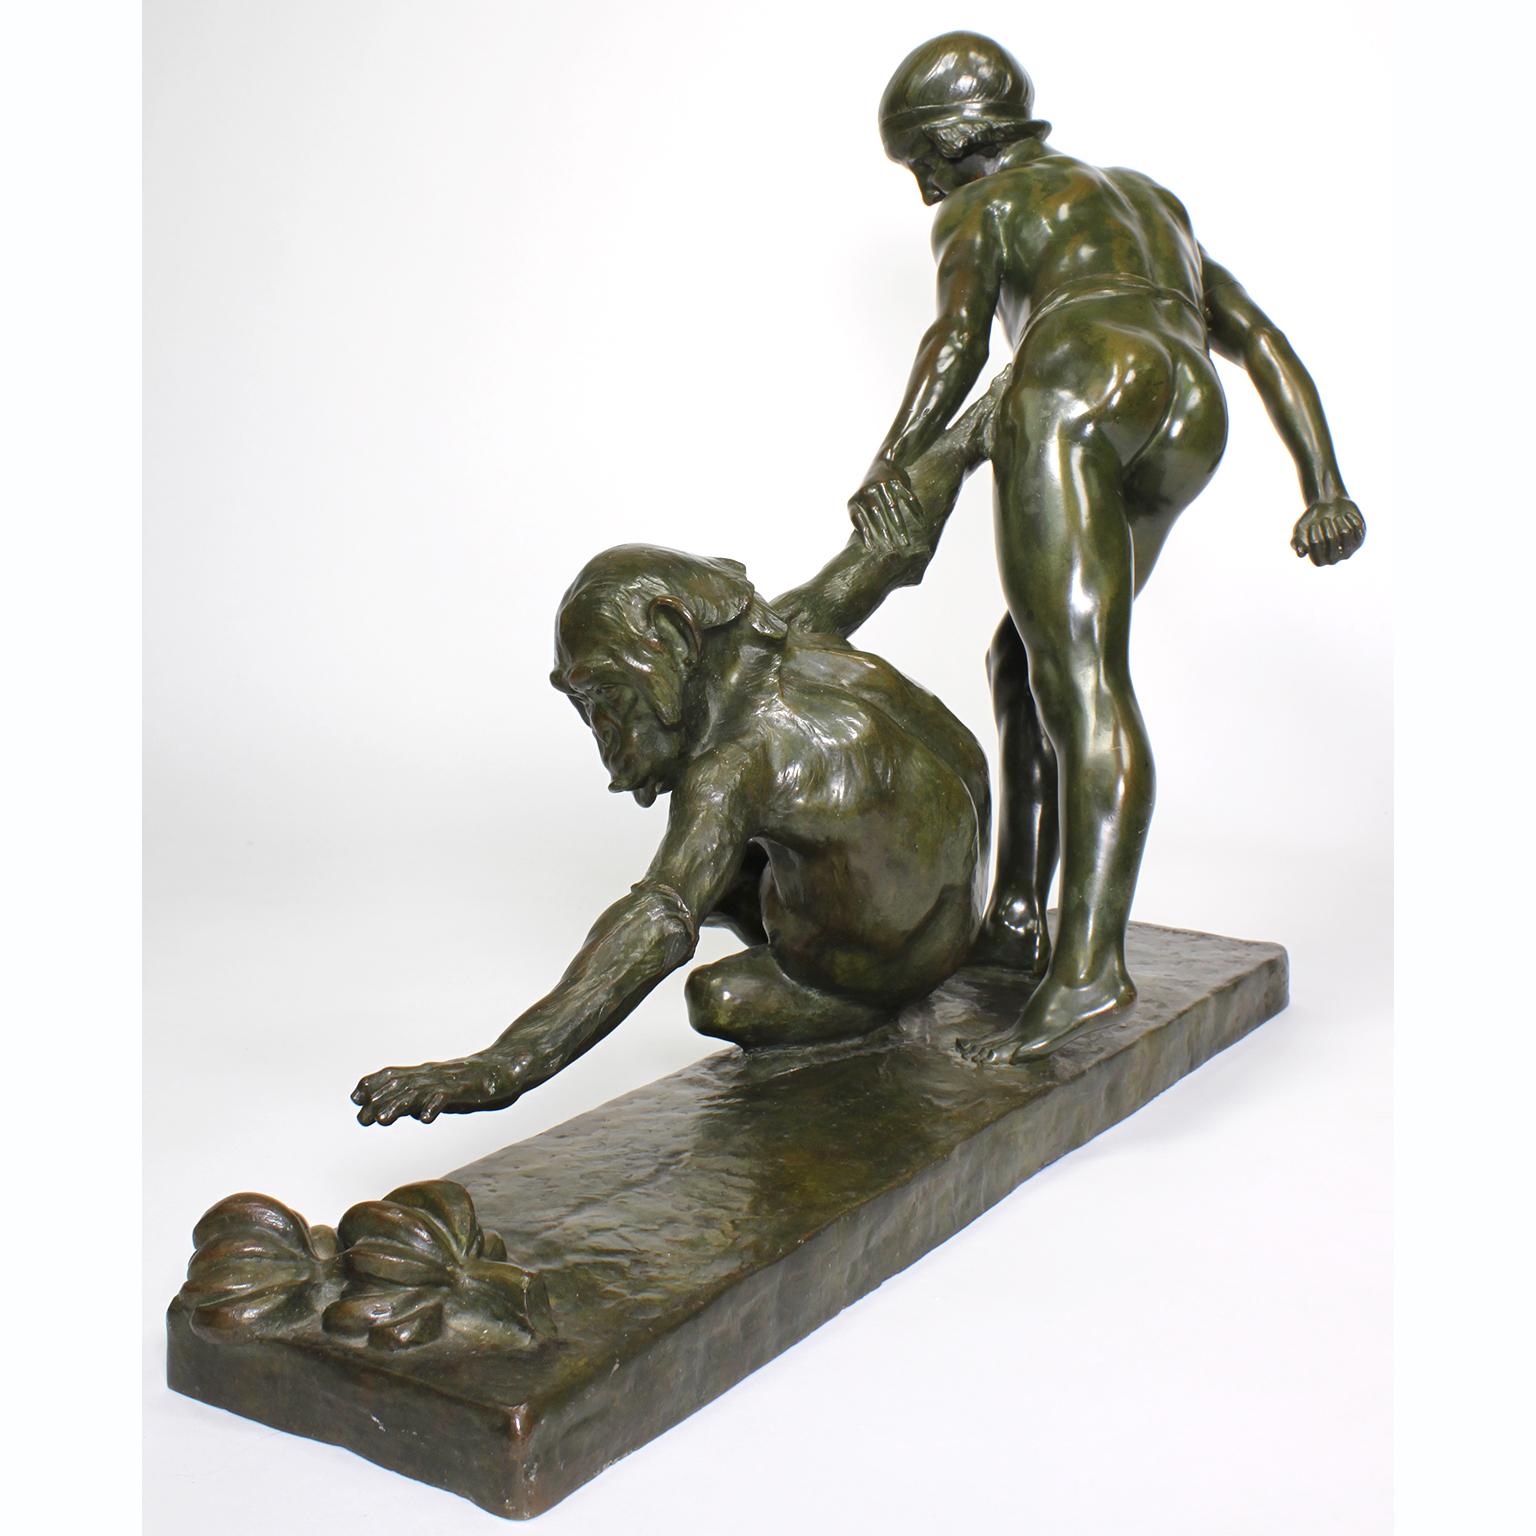 A fine French early 20th century patinated bronze group of 